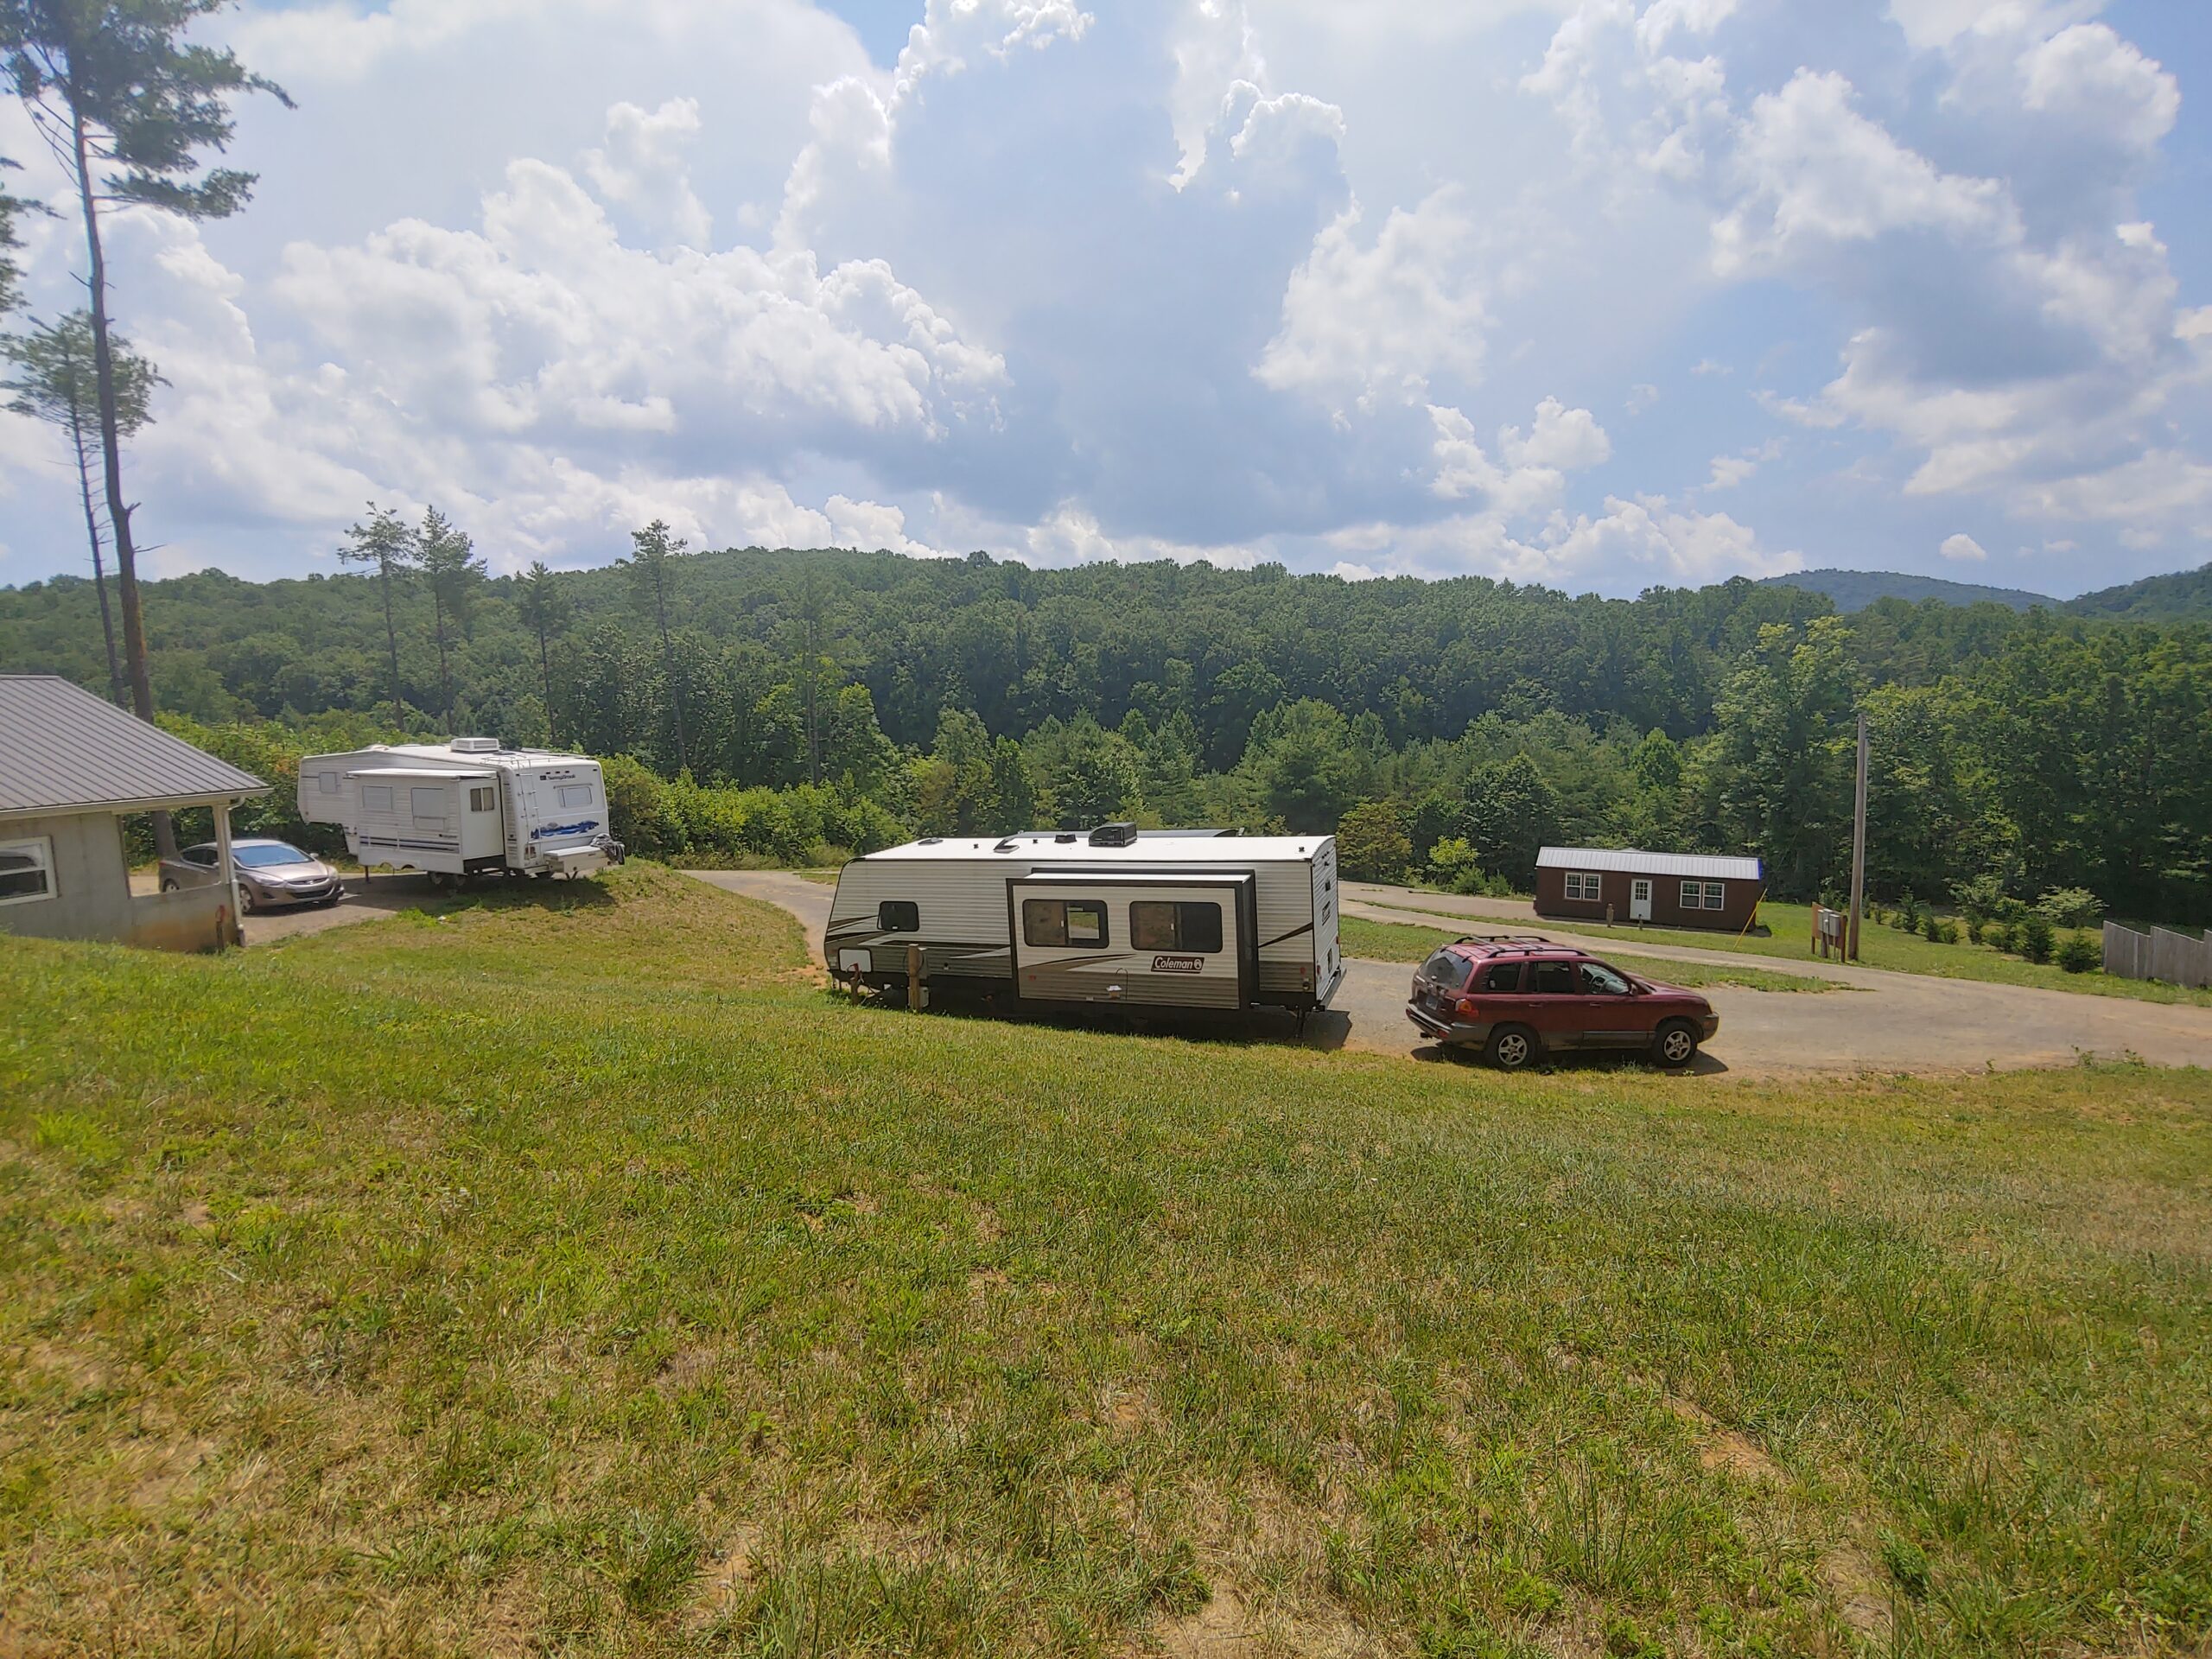 View of the Floyd Parkway Village campground with campers